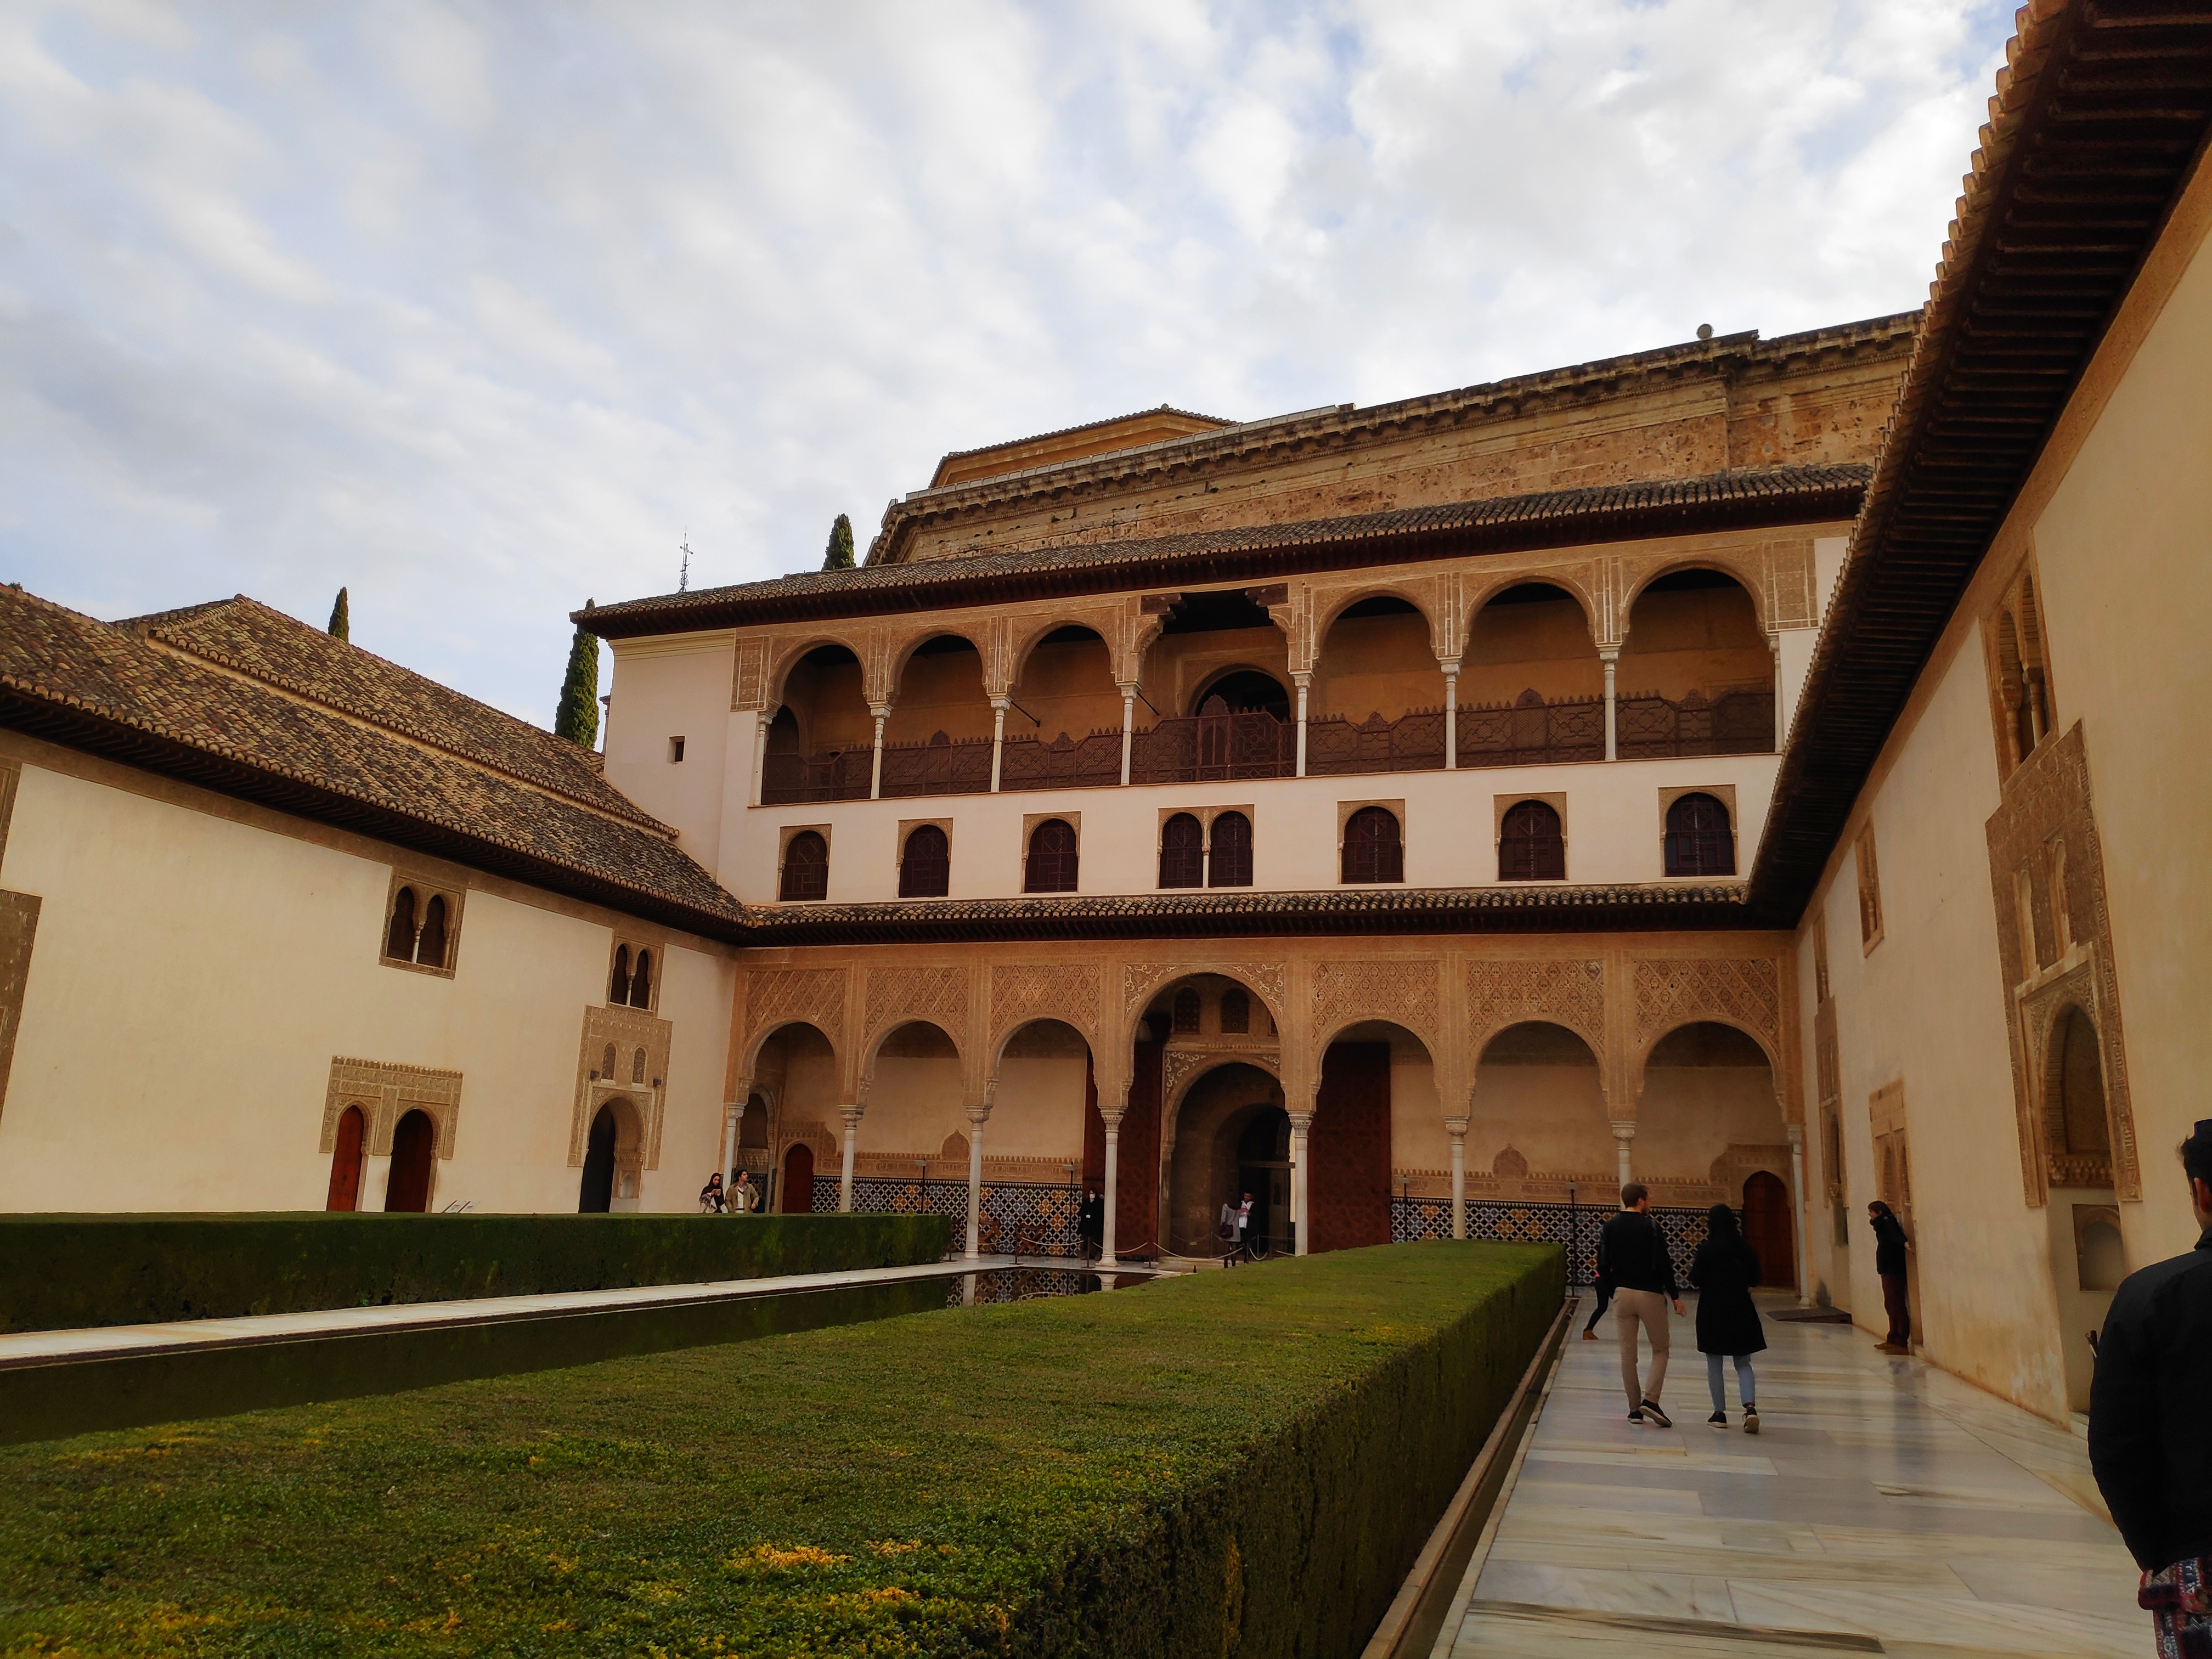 Image of Day trip to Granada with guided visit to the Alhambra